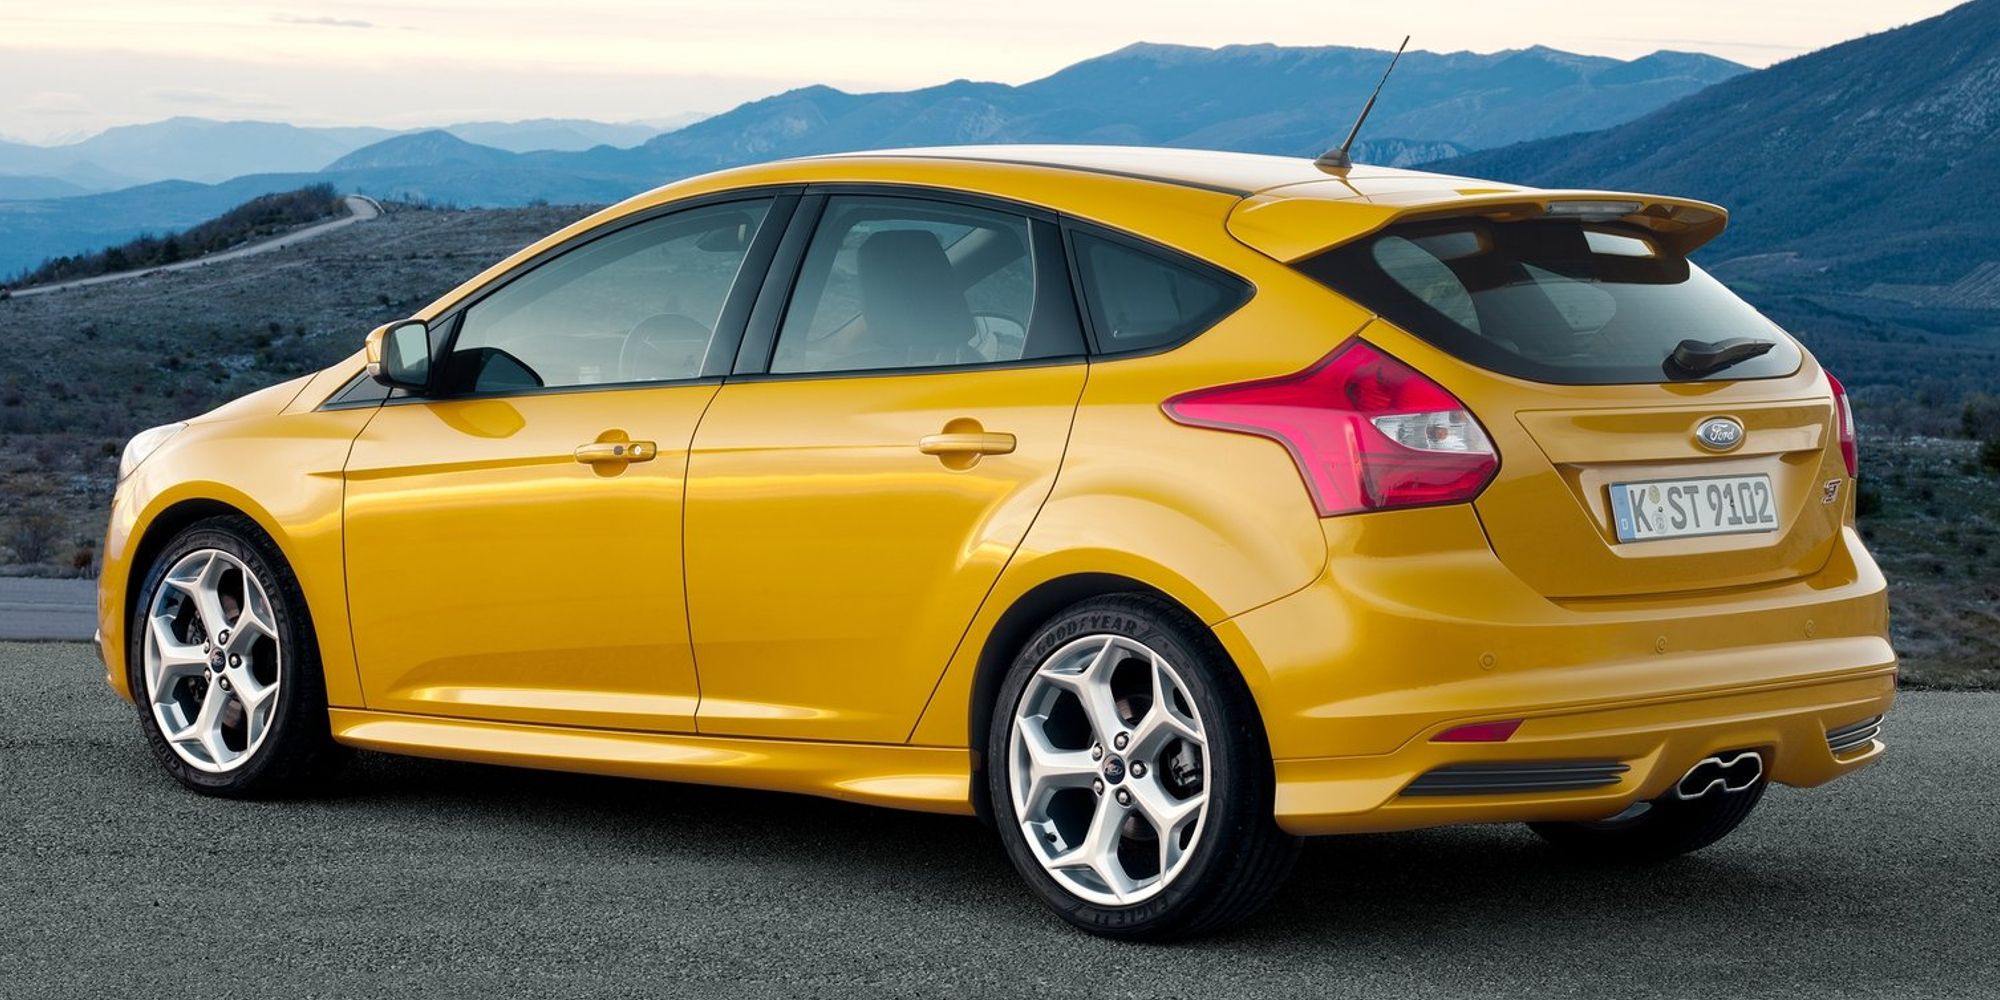 Rear 3/4 view of the Focus ST (pre-facelift)